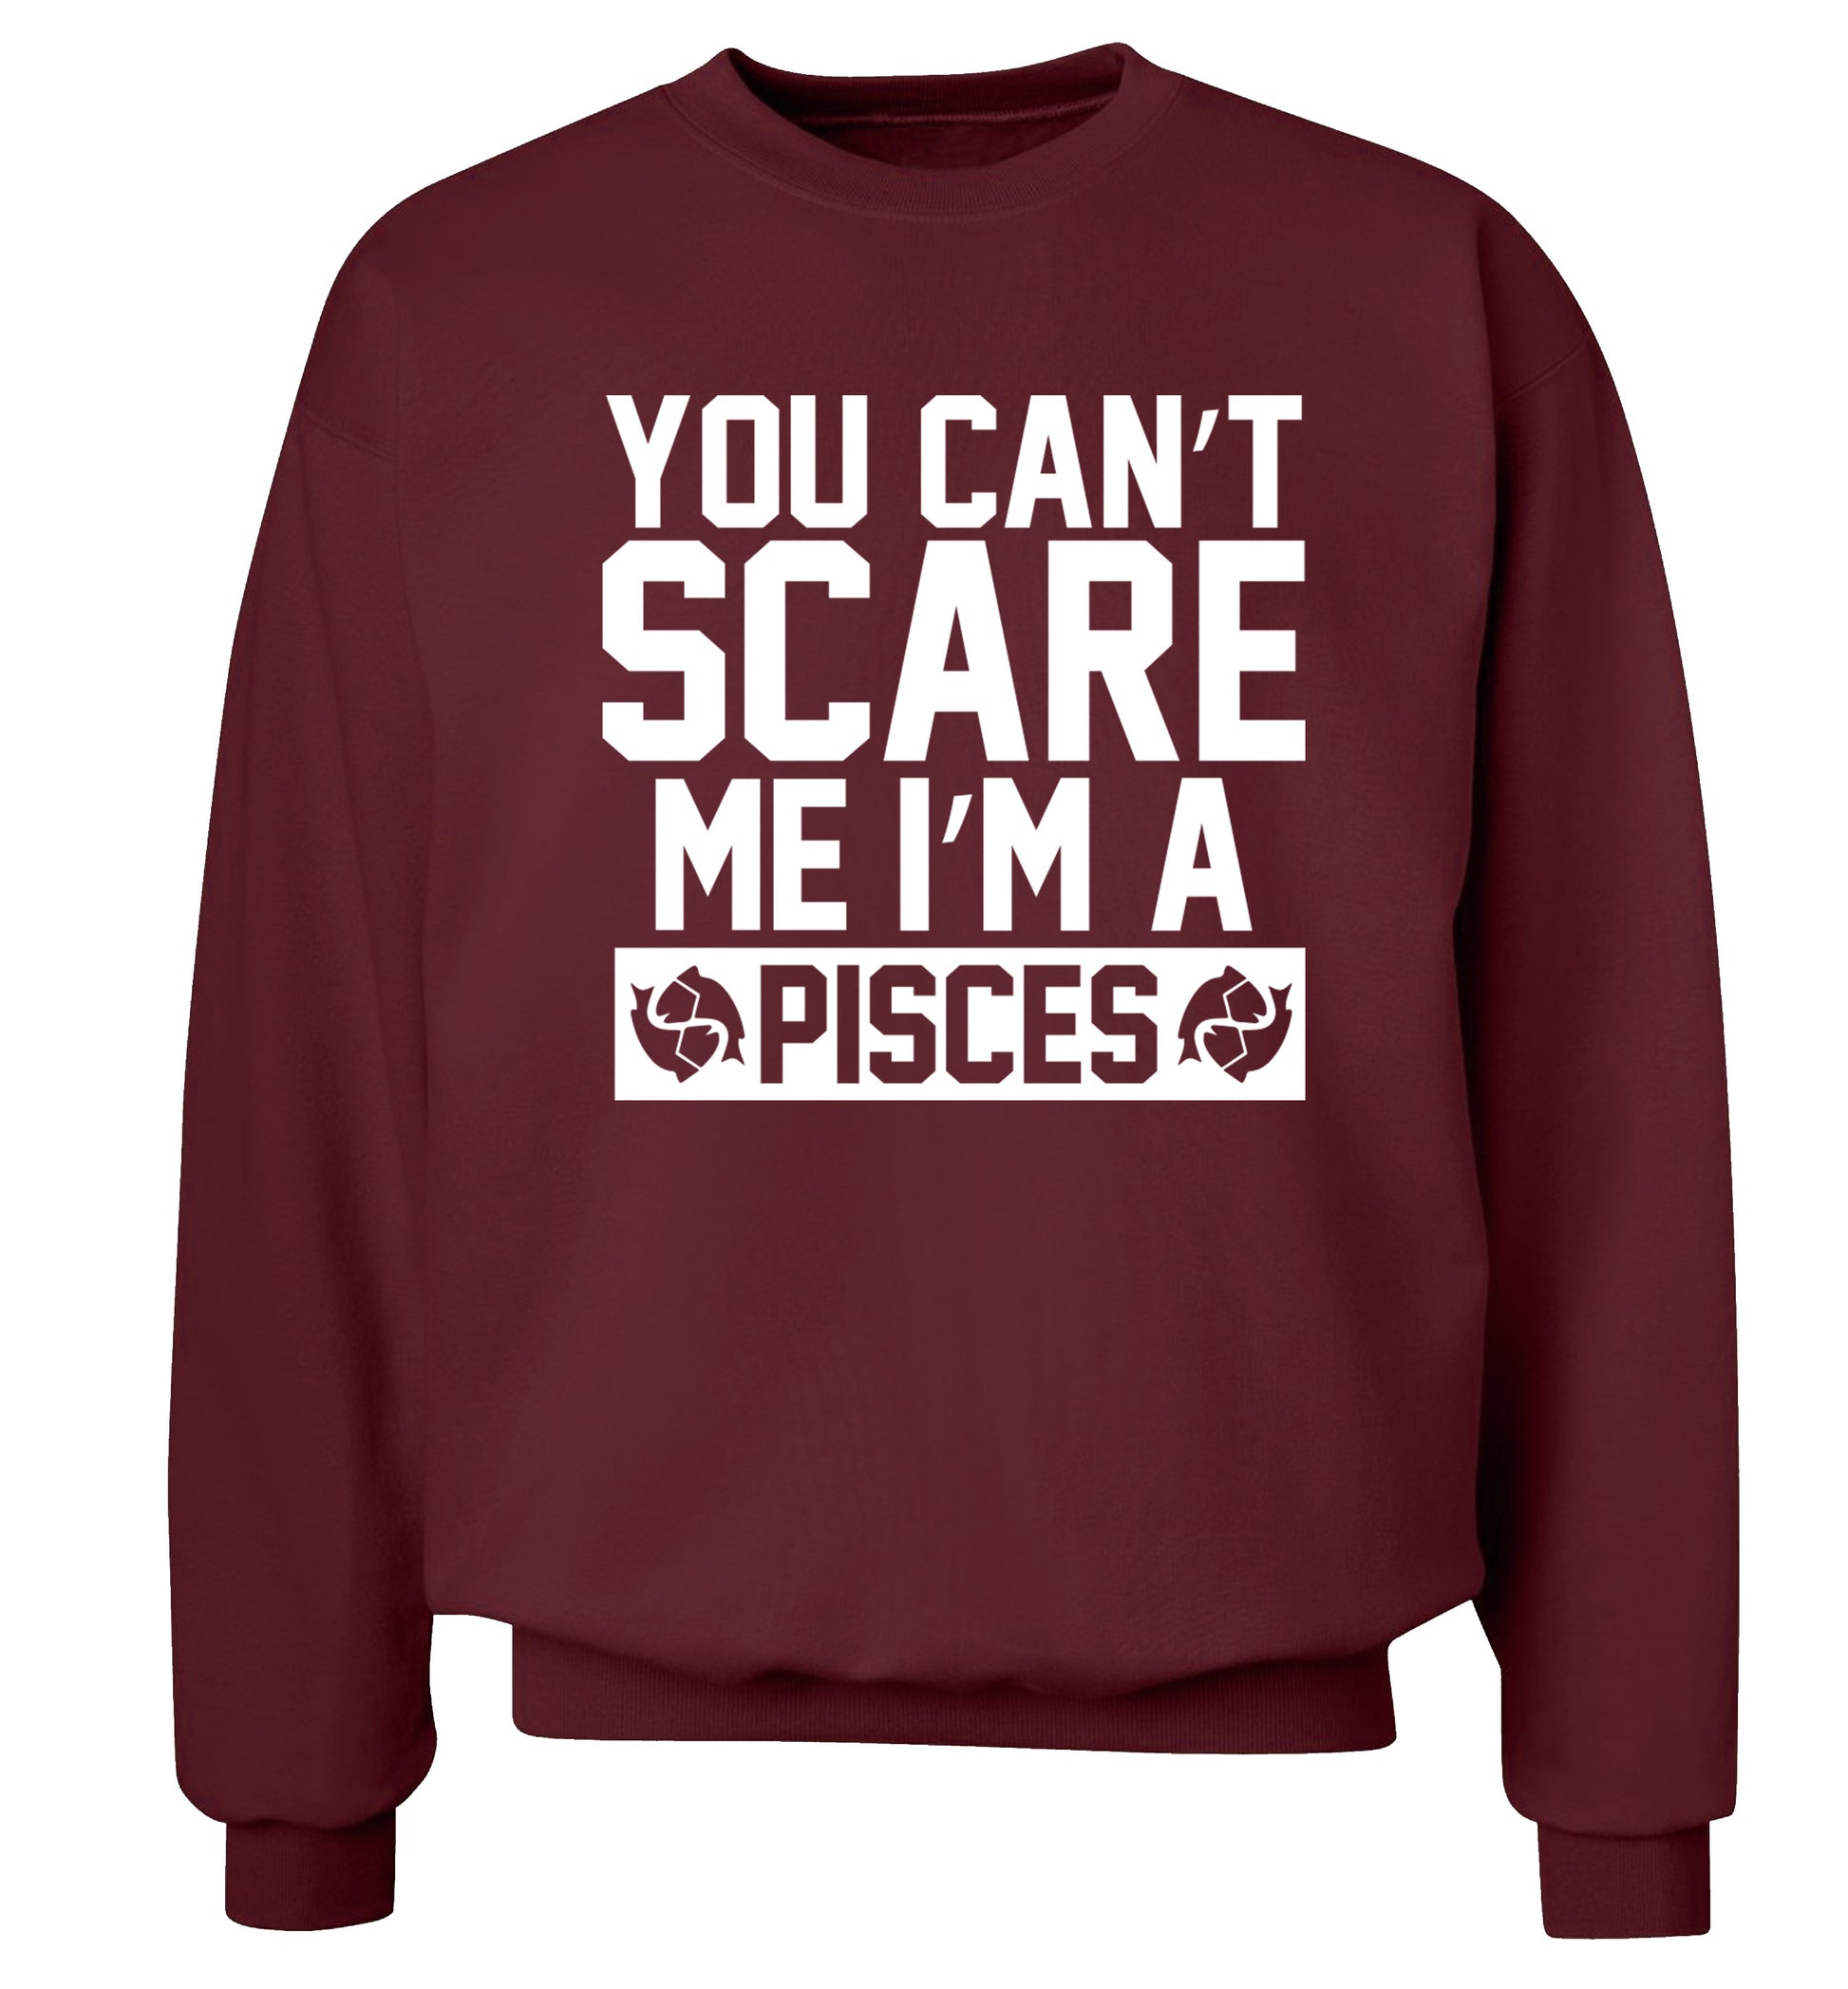 You can't scare me I'm a pisces Adult's unisex maroon Sweater 2XL